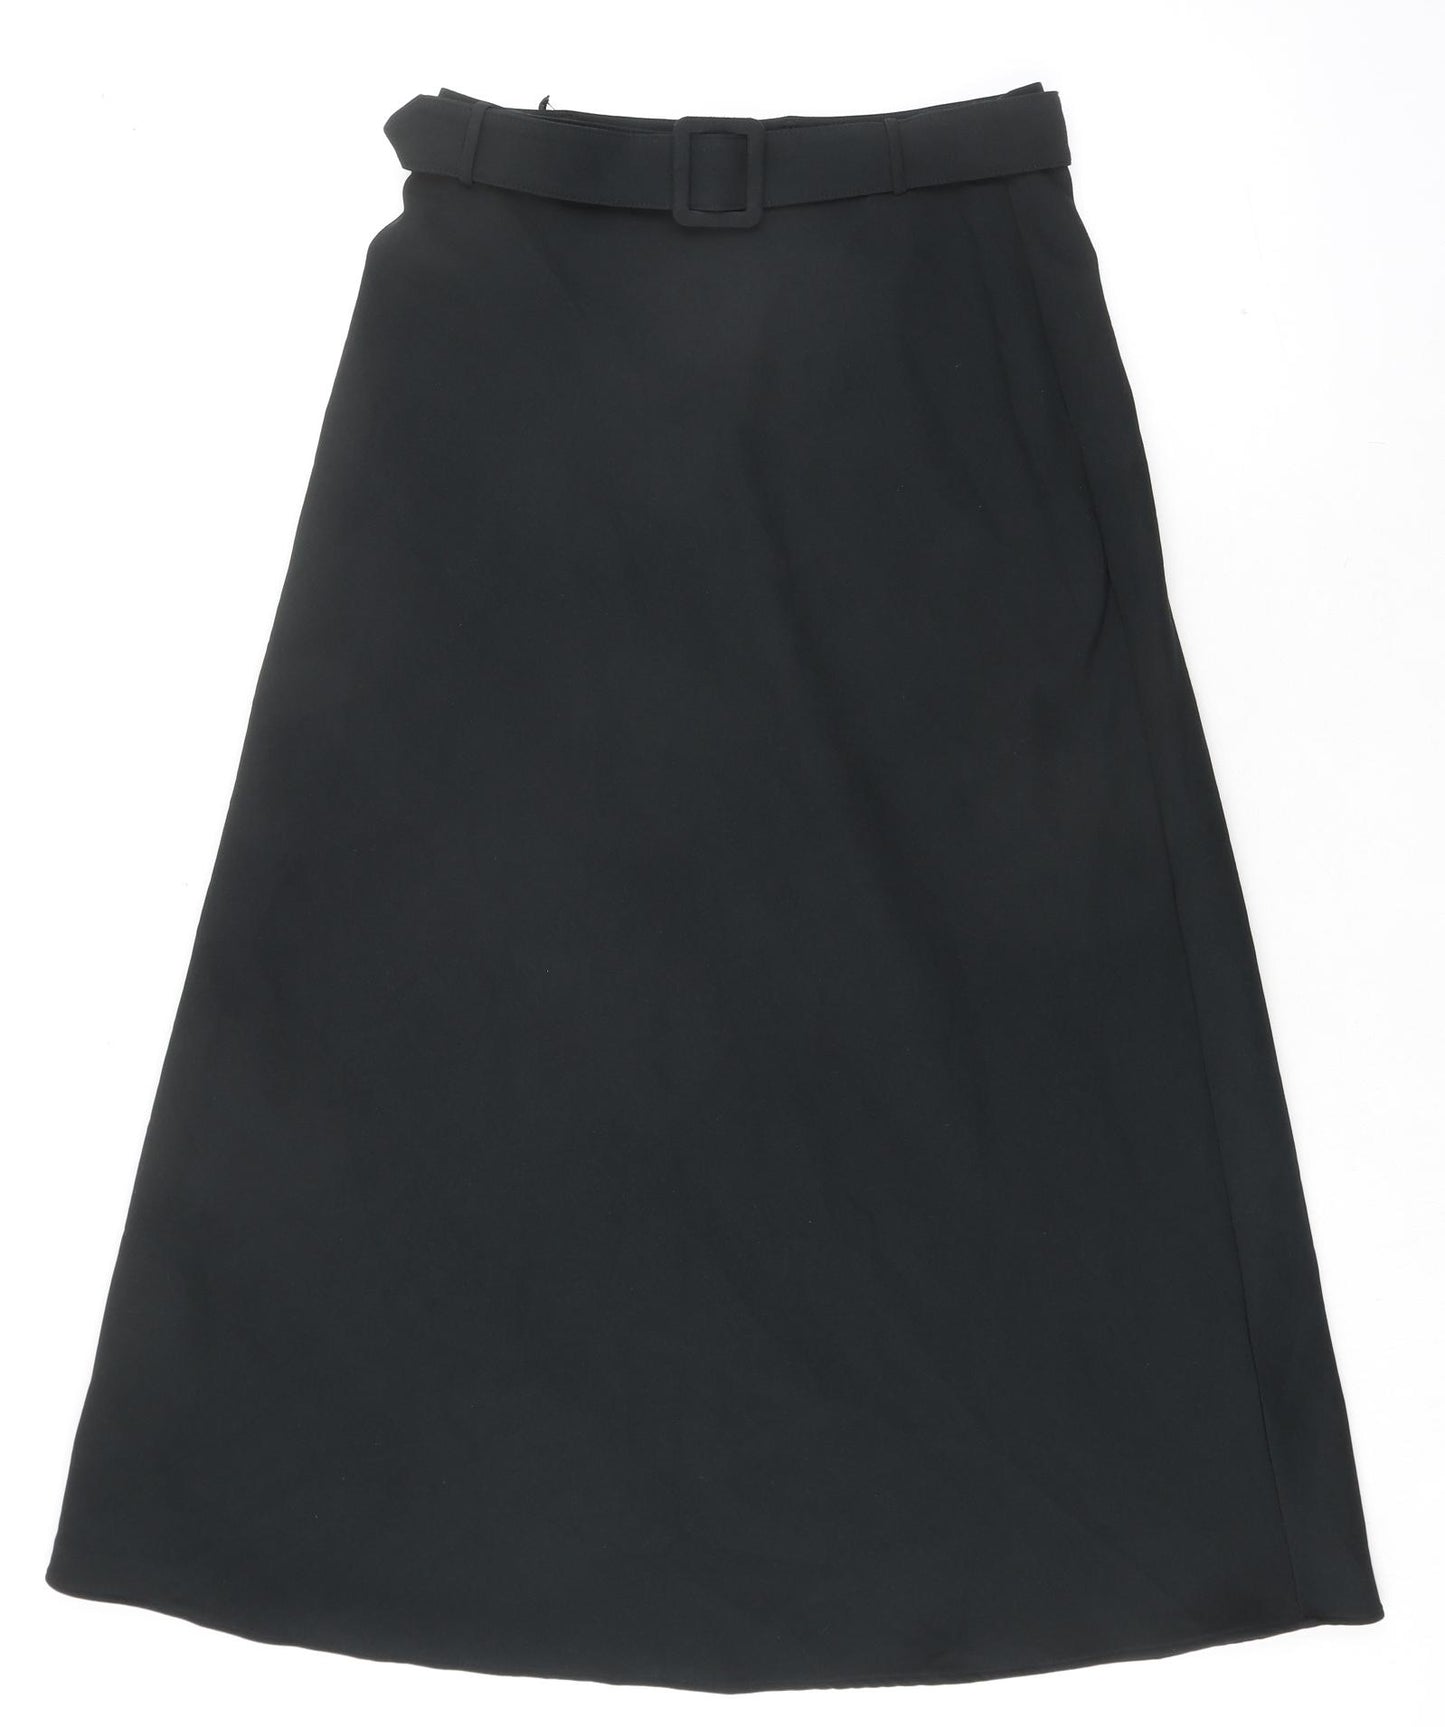 Marks and Spencer Womens Black Polyester A-Line Skirt Size 8 Zip - Belt included